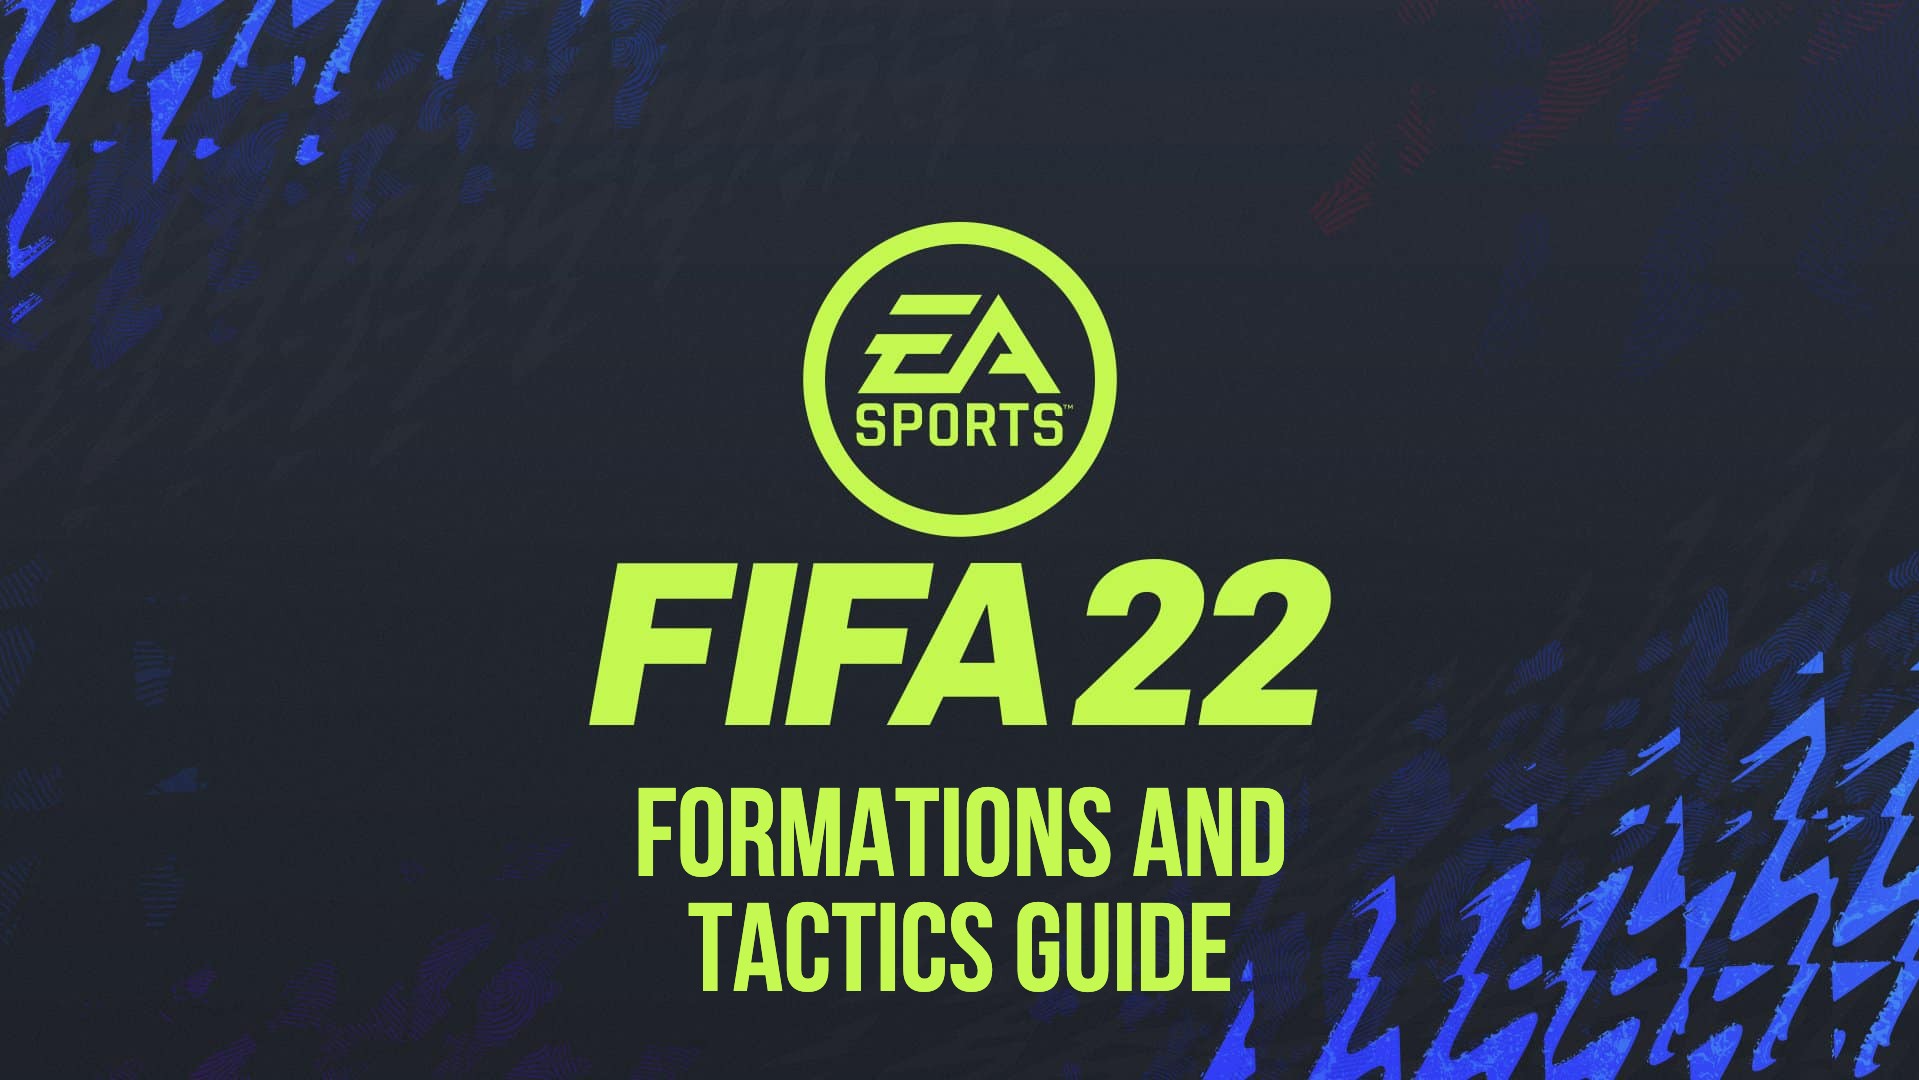 FIFA 21 Beginner's Guide, Essential Tips and Tricks